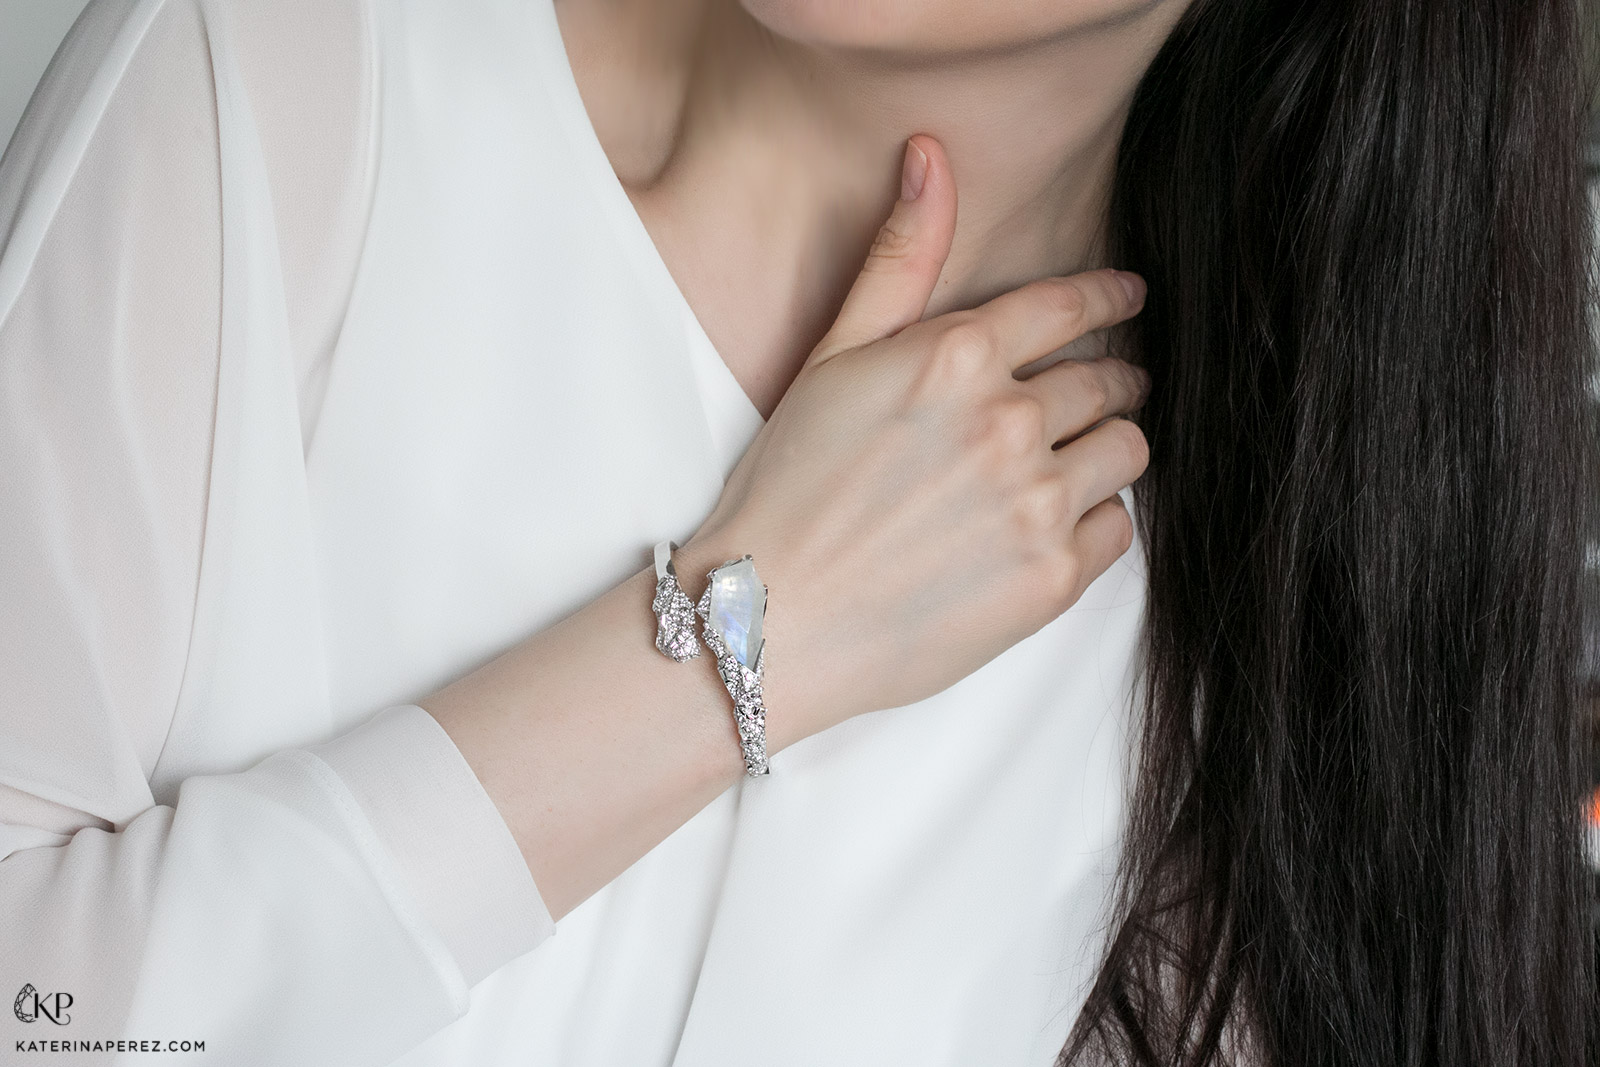 Neha Dani 'Pasterze' bangle from 'Glacier' collection in moonstone and diamonds